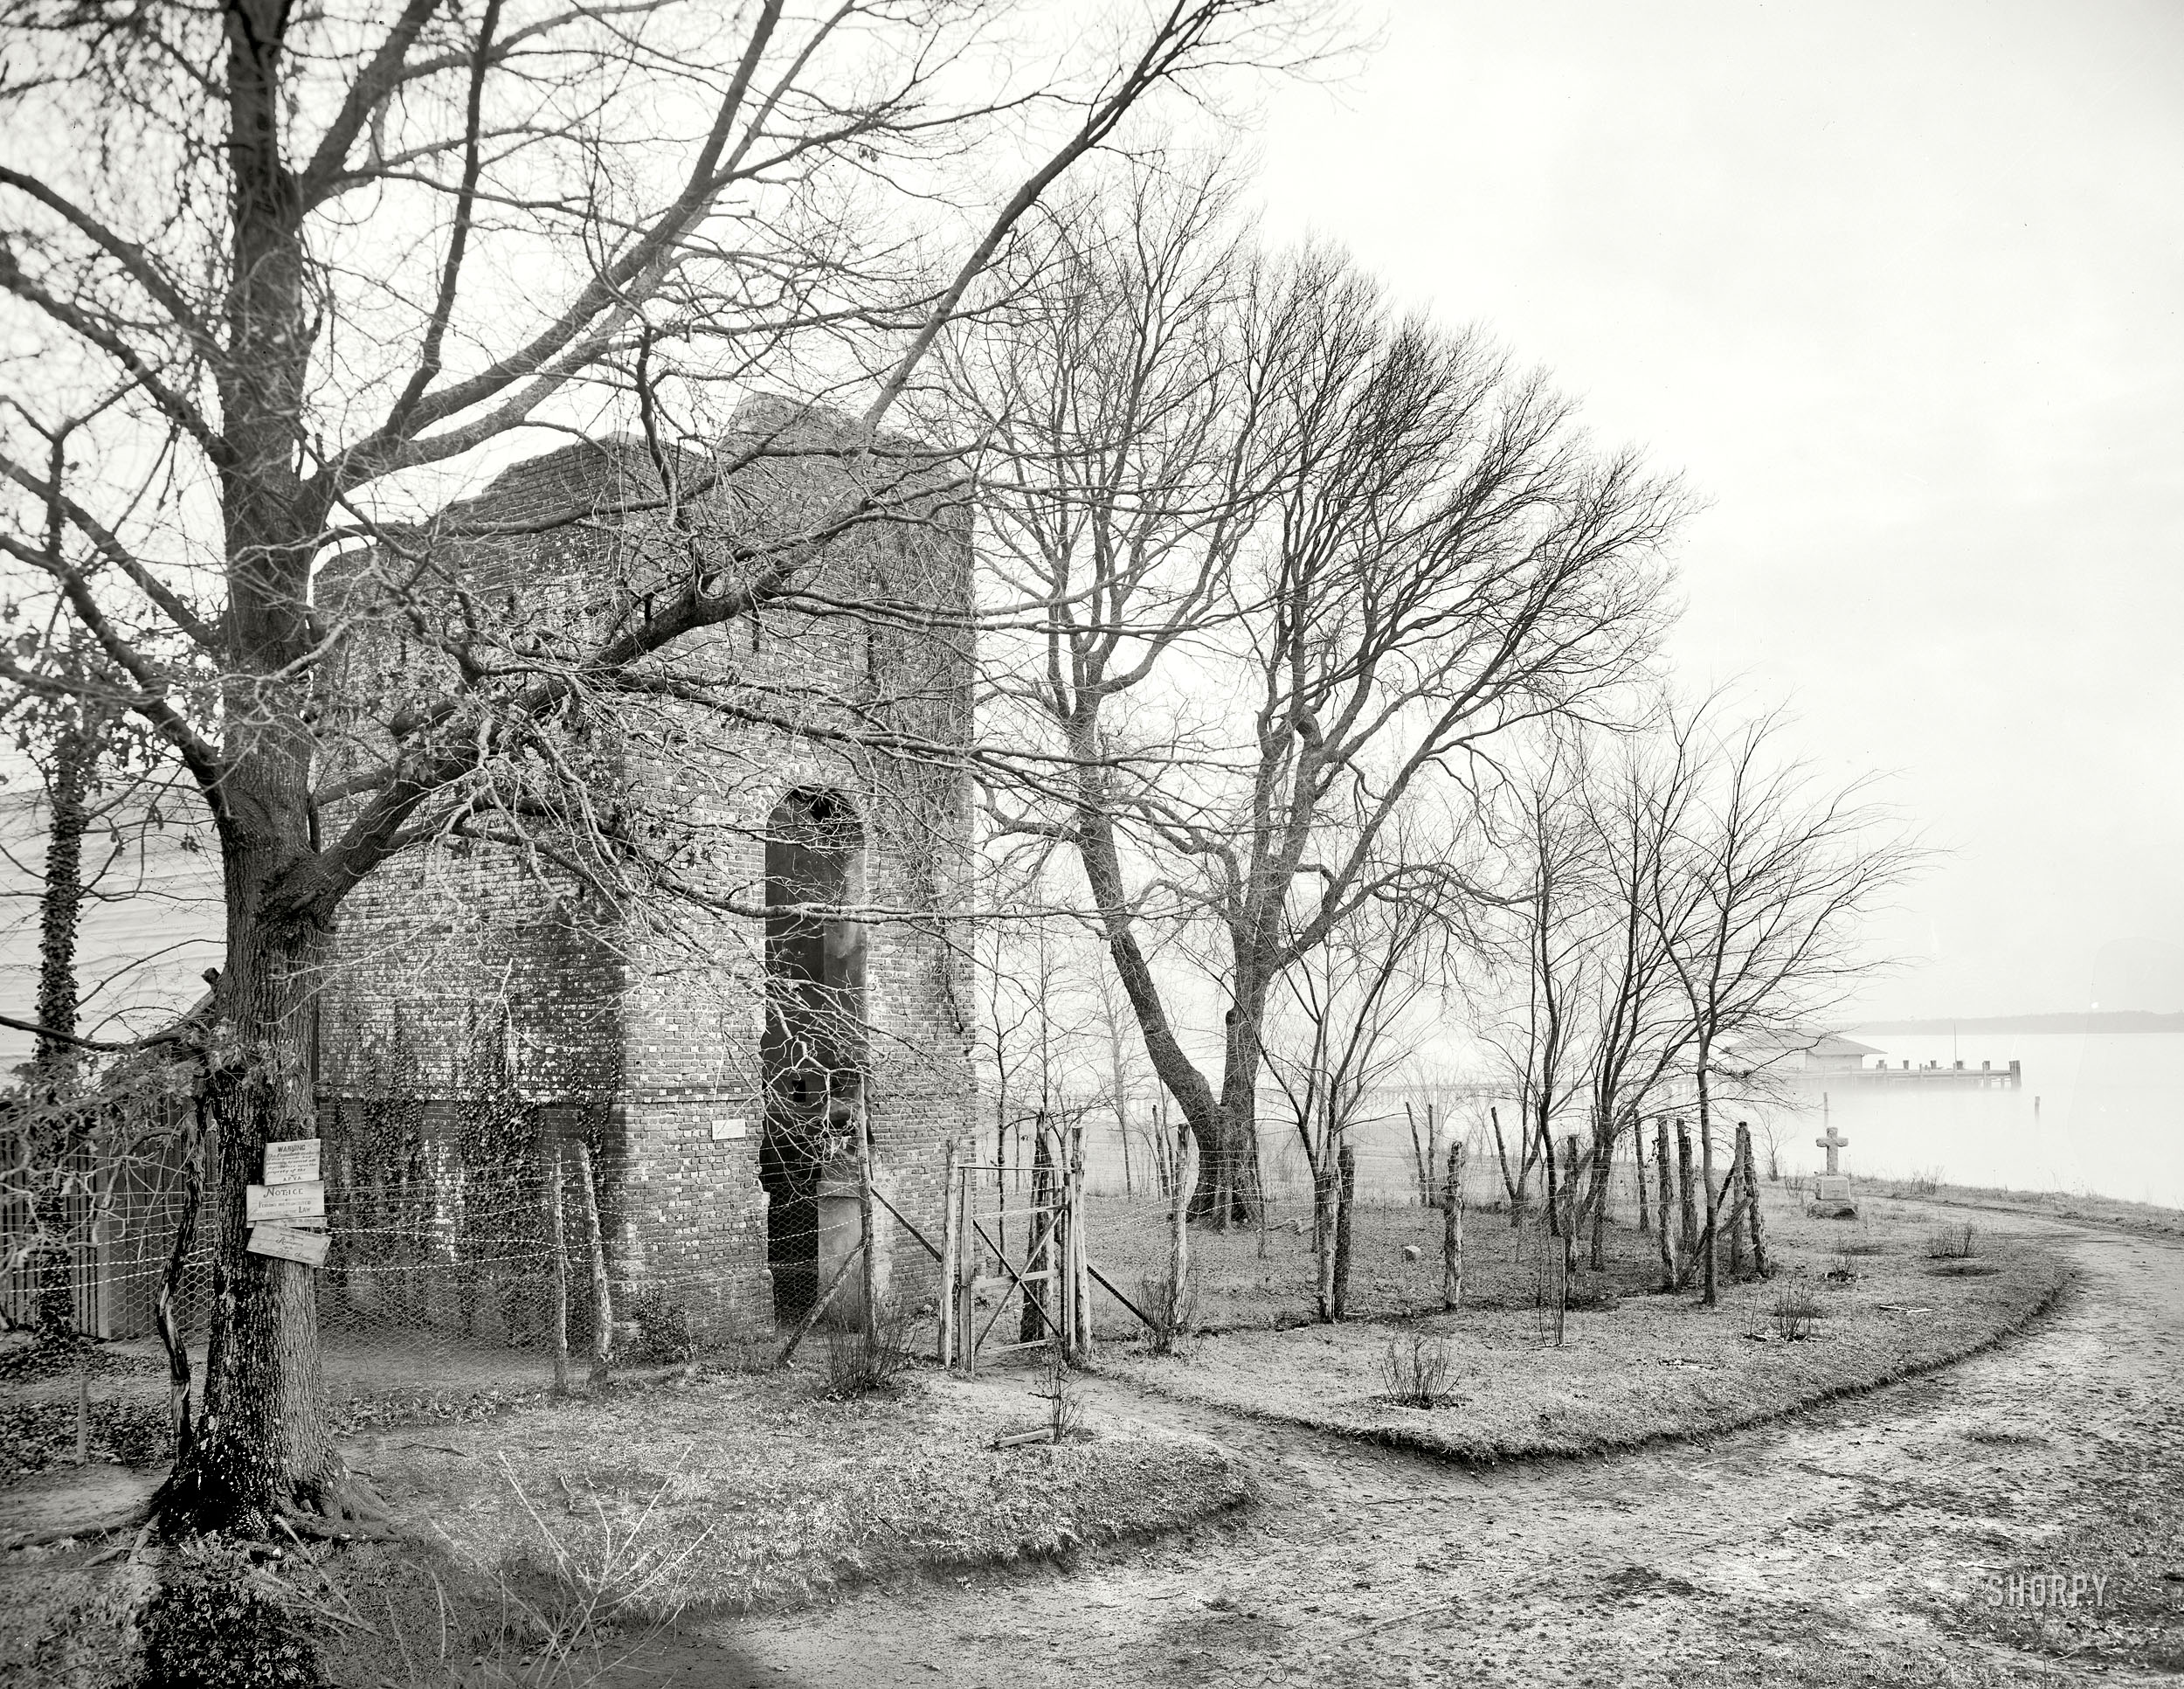 Circa 1905. "Old church at Jamestown, Virginia." Please, no pilfering. 8x10 inch dry plate glass negative, Detroit Publishing Company. View full size.